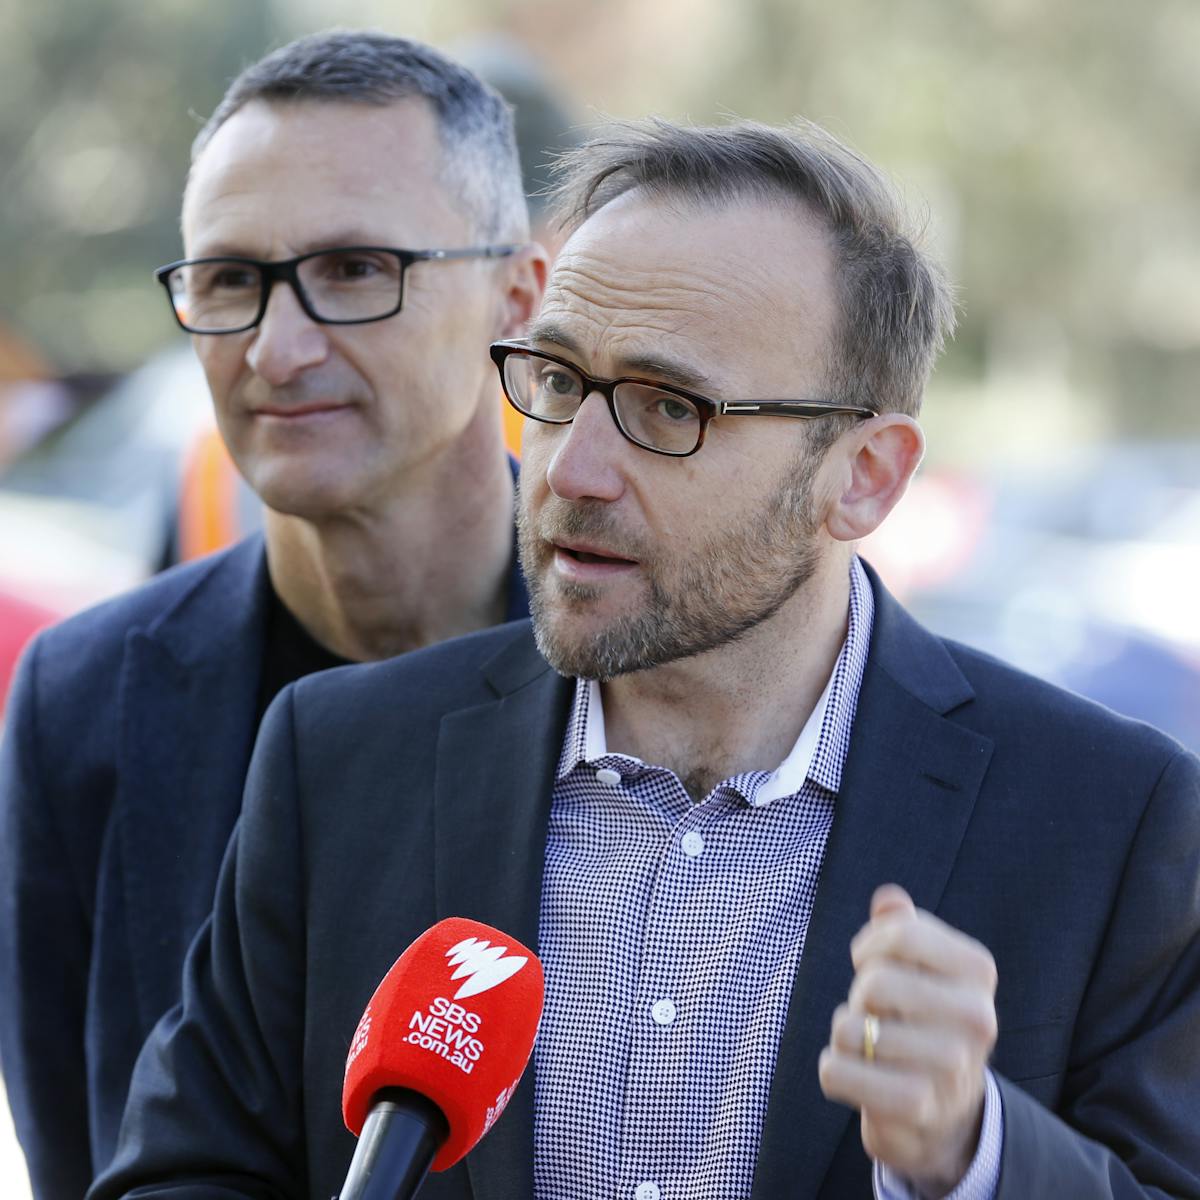 Natale A Natale.Where Are The Greens As Di Natale Leaves Bandt Must Find A Spotlight For His Party In A Pandemic